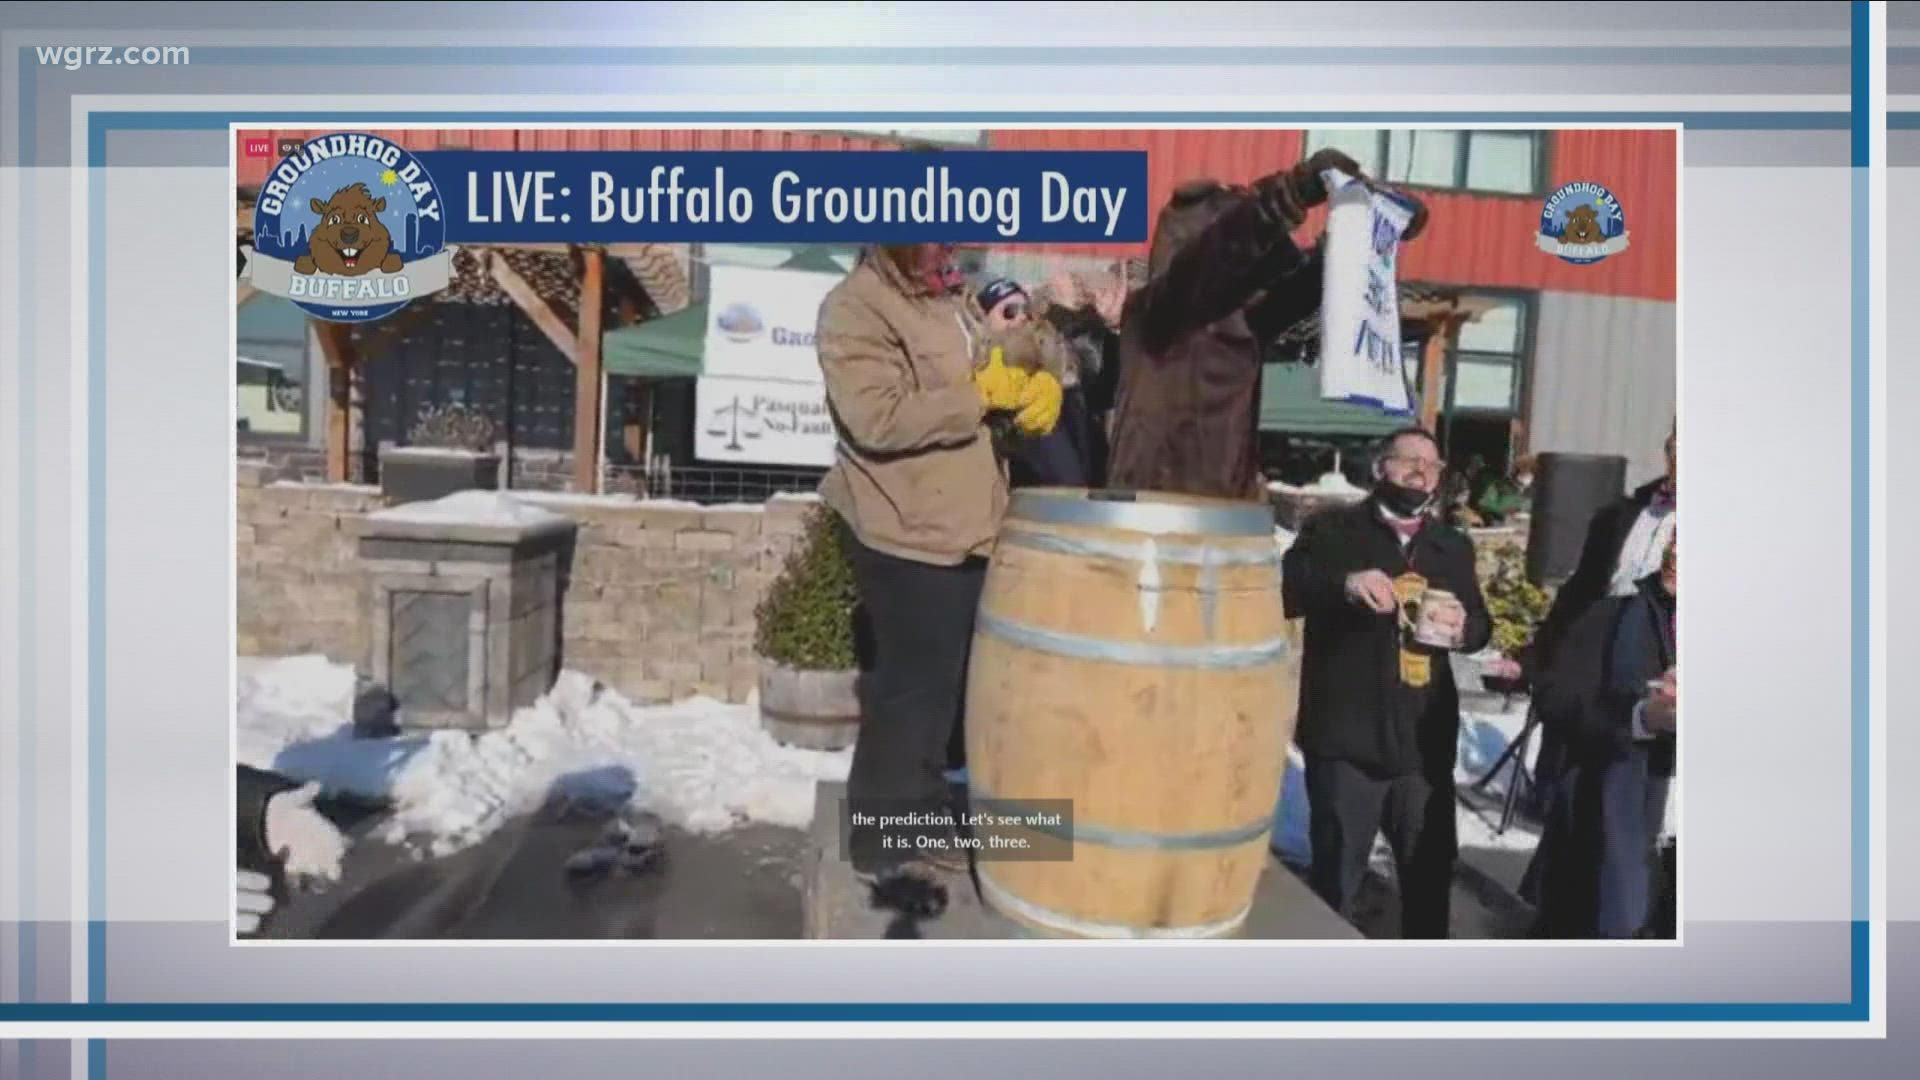 It's that time of year when all eyes are on the groundhog. Today is Buffalo Groundhog day.